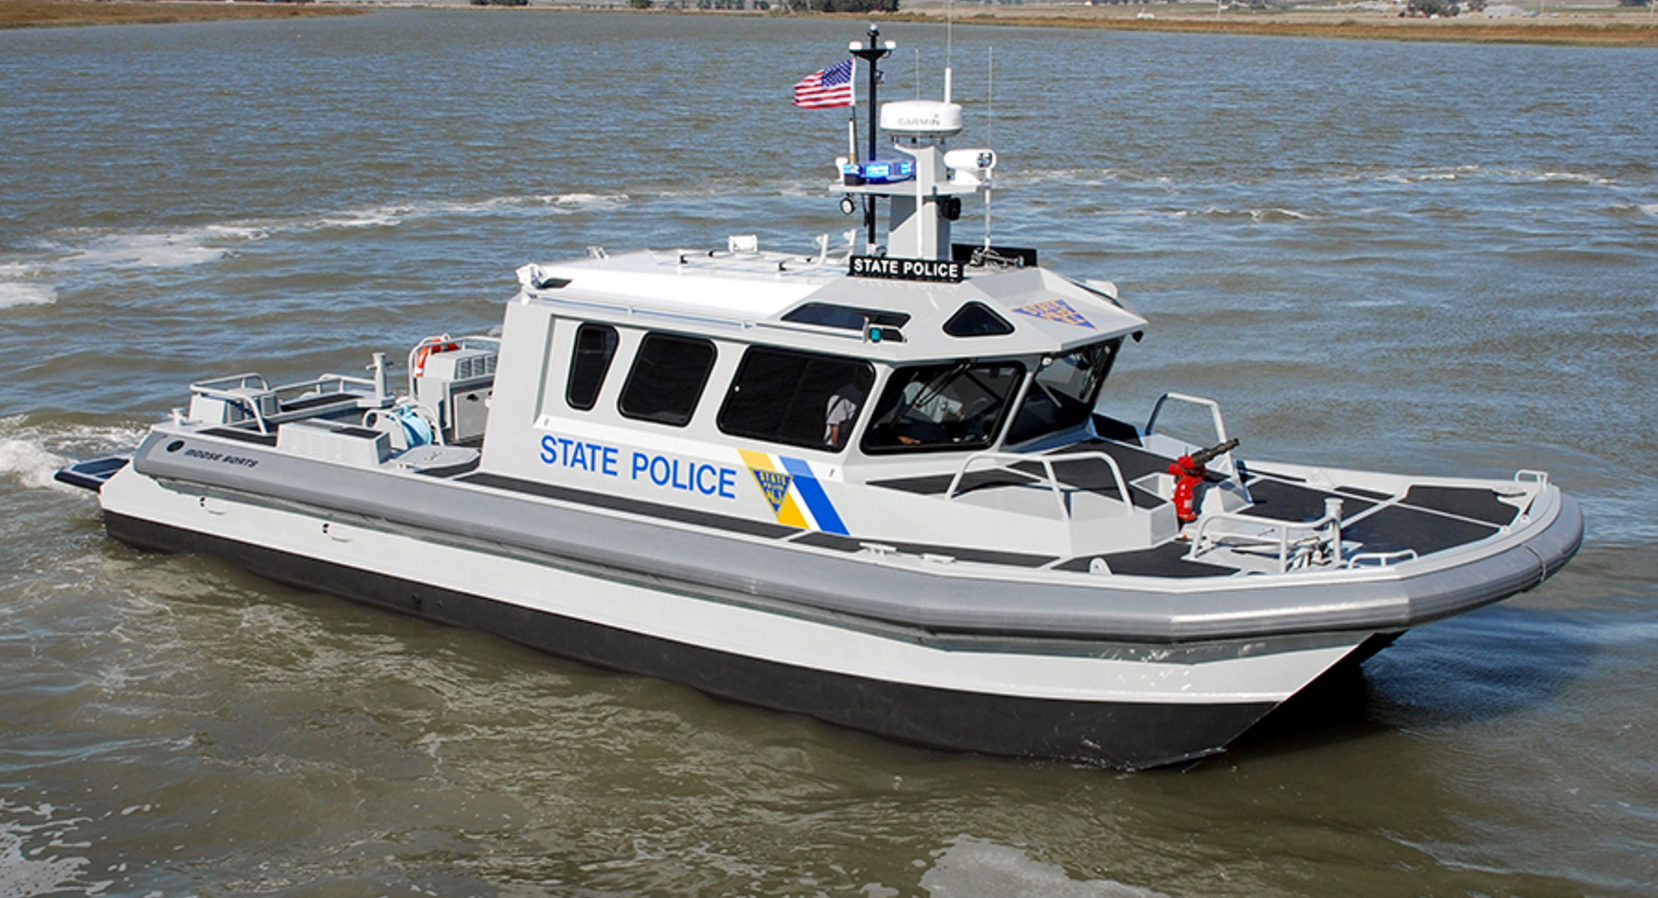 A New Jersey State Police boat.